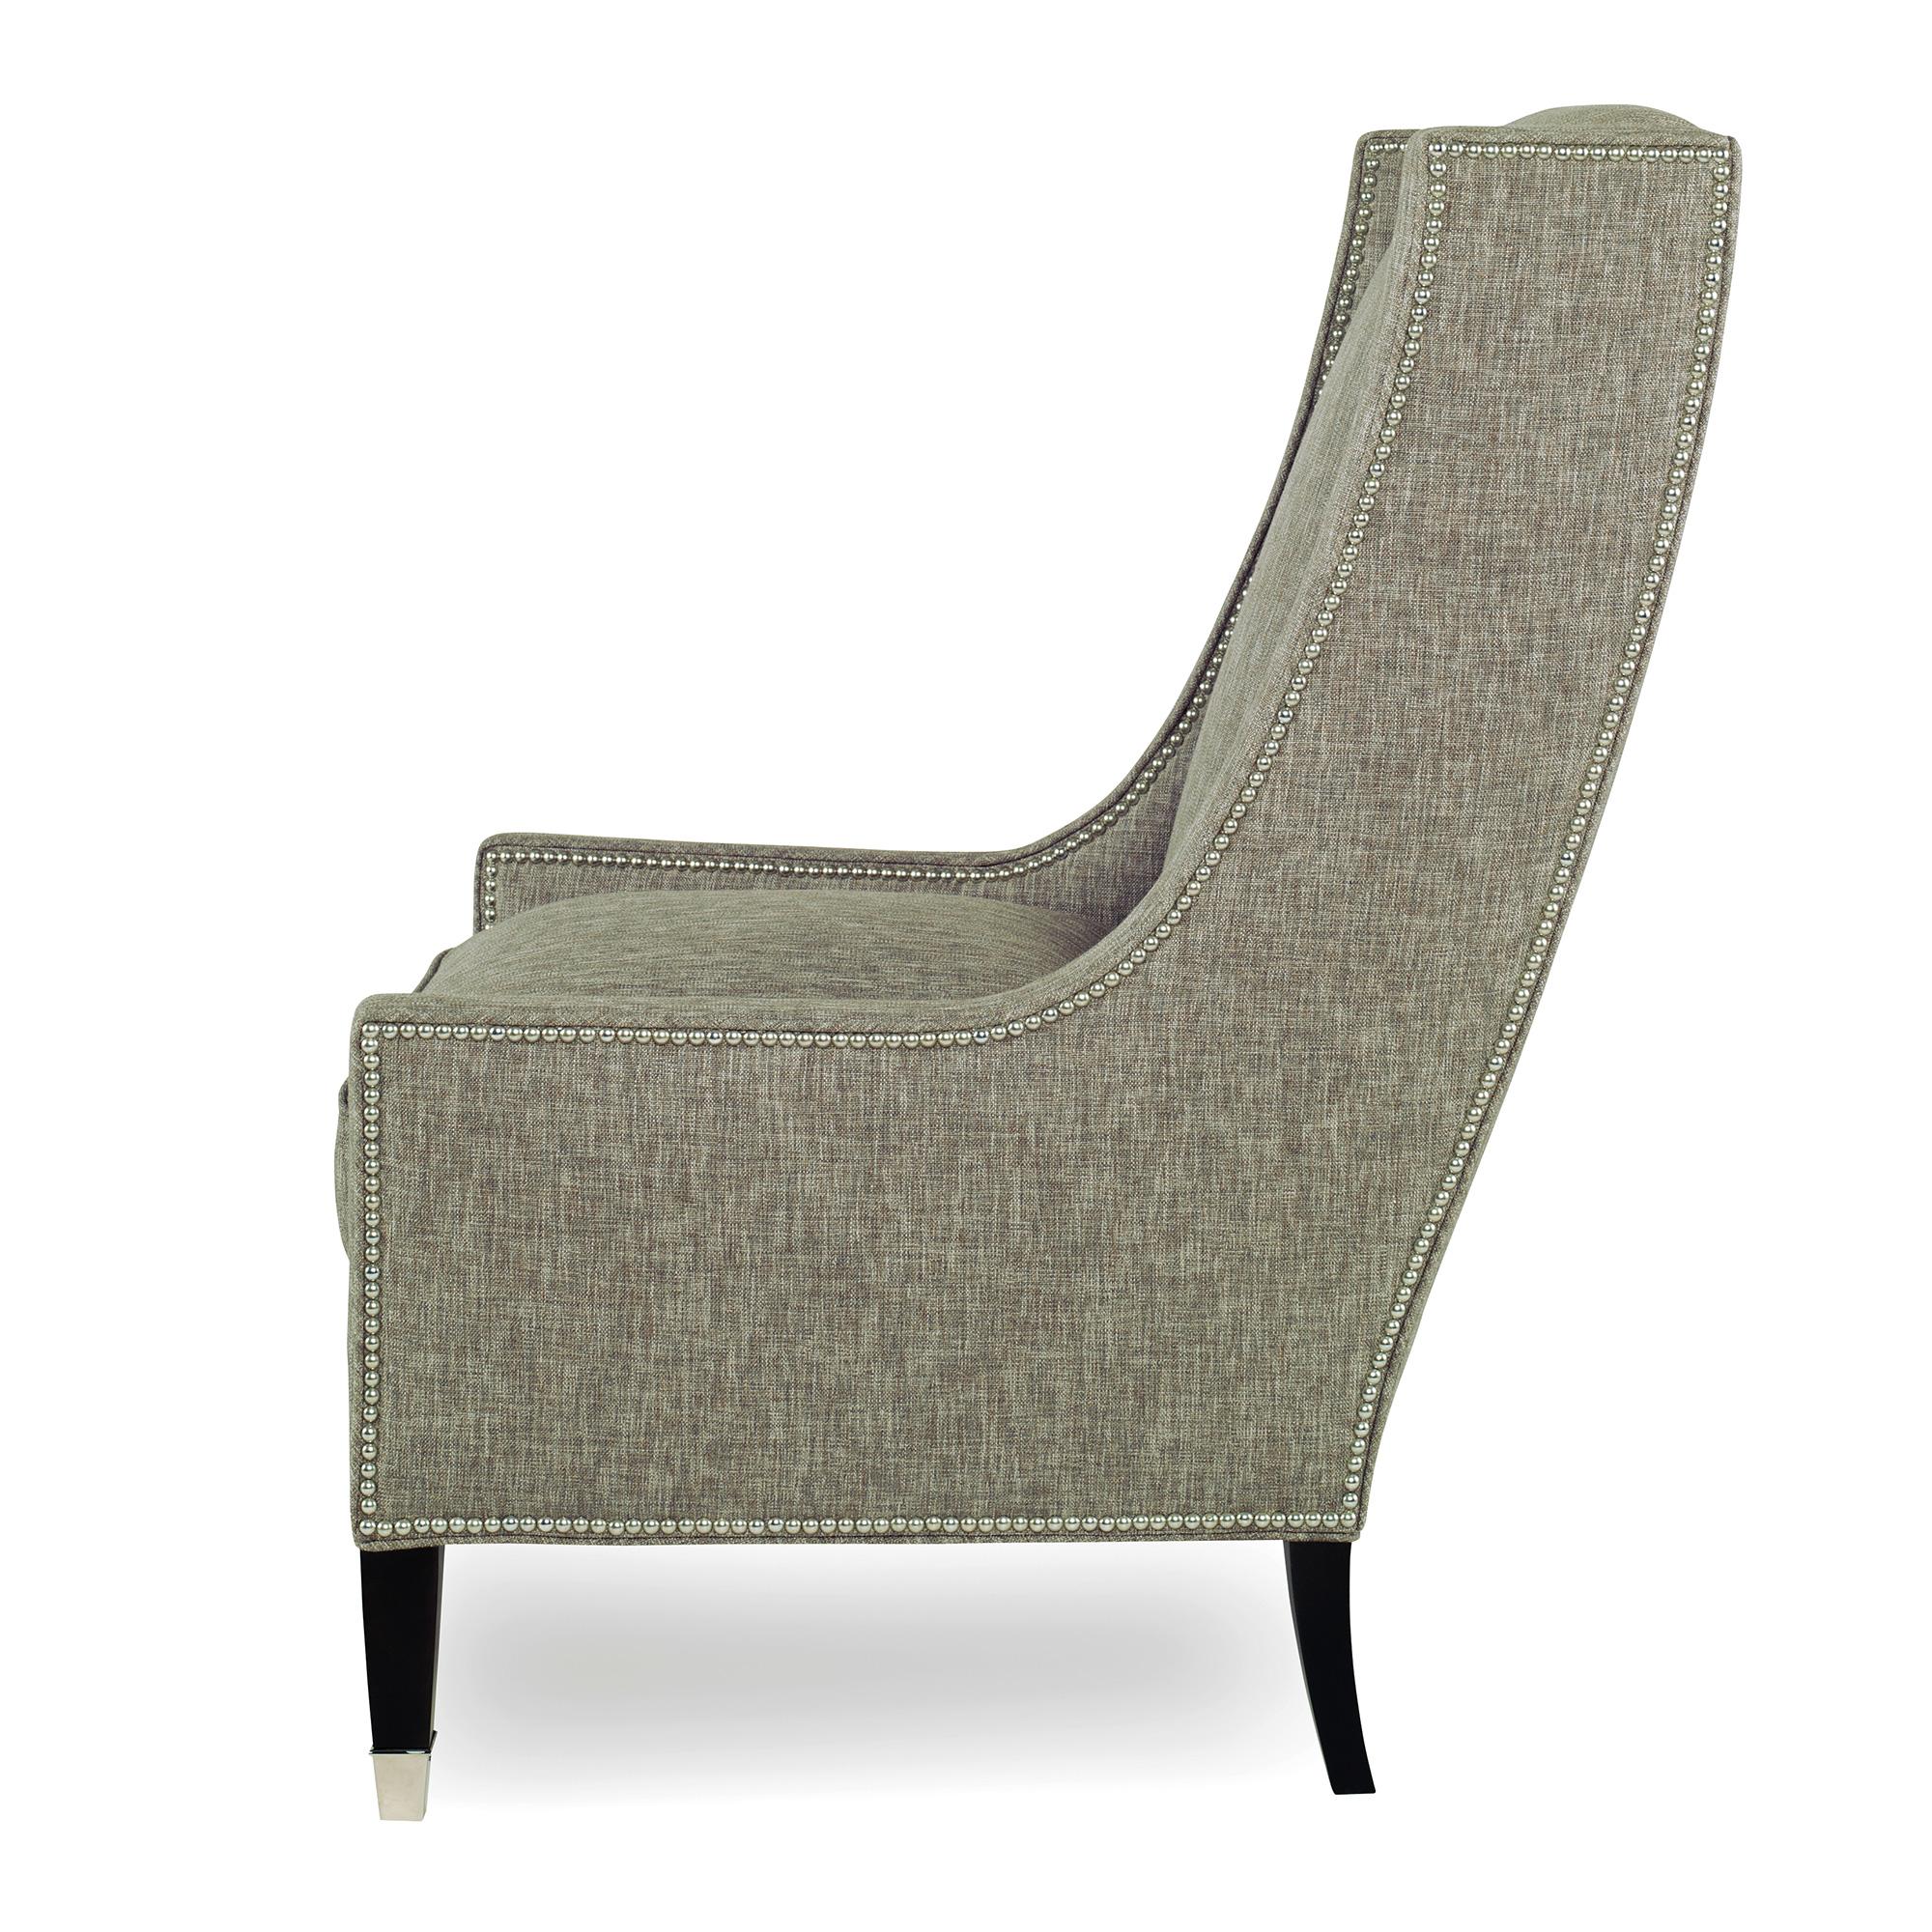 Modern Tall Navarre Chair in Gray by CuratedKravet